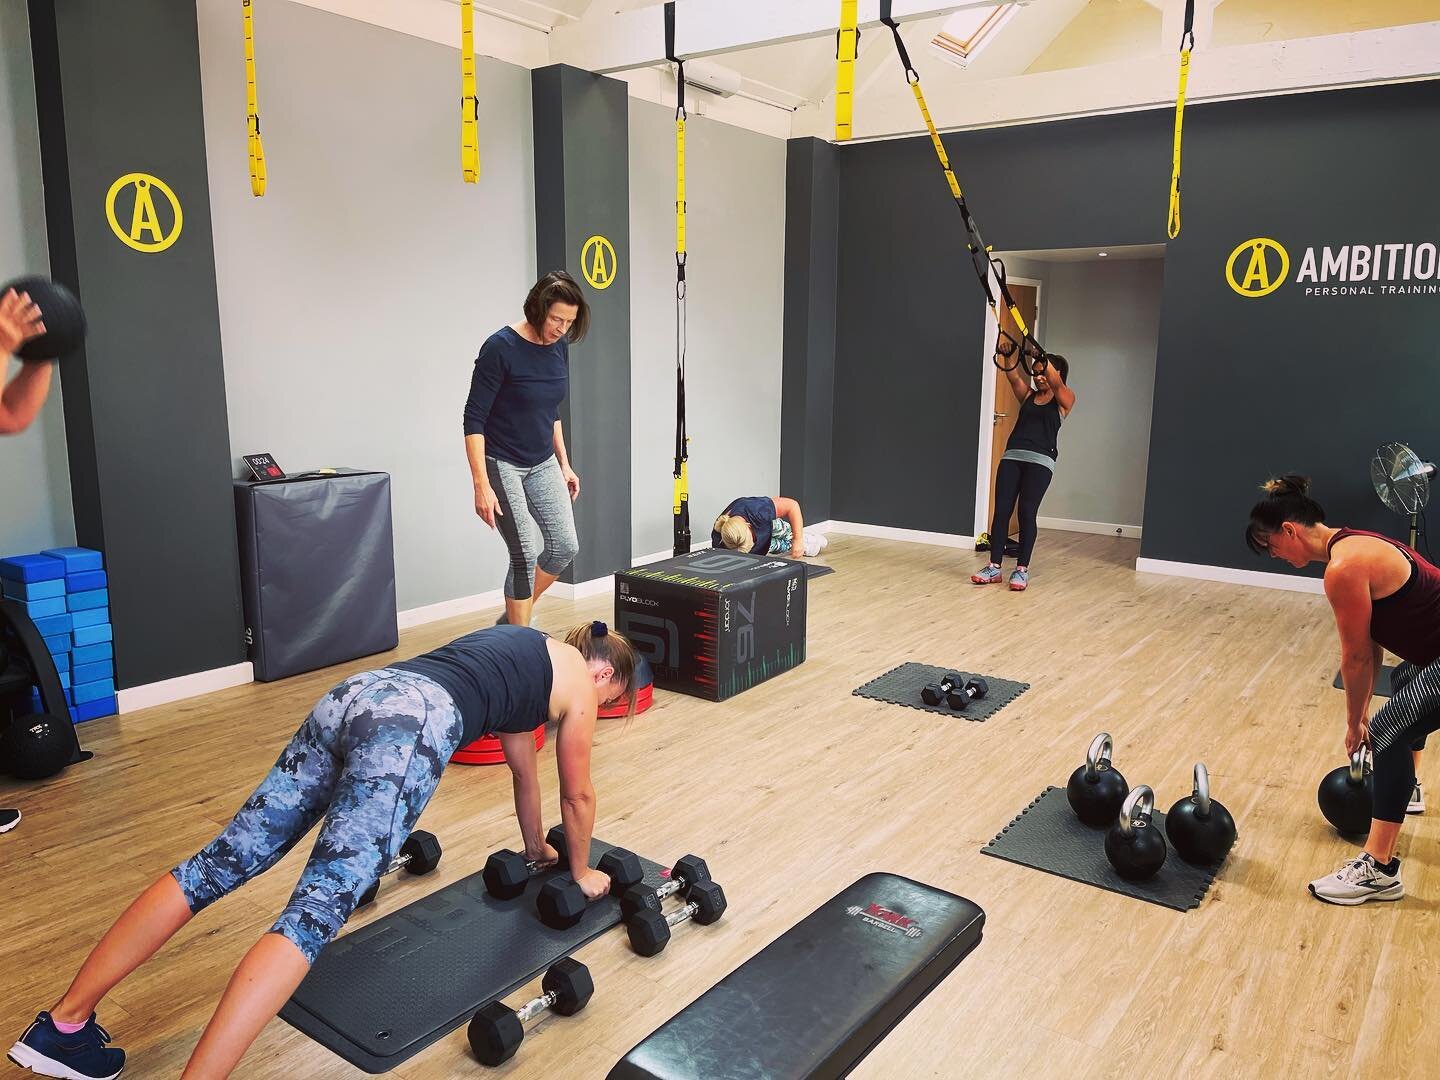 Our Super Circuit sessions are getting busier 💪🏼💪🏻💪🏽💪🏾 and tougher 😅
Monday 7pm
Saturday 10am 

#smallgrouptraining #supercircuit #hiitworkouts #personaltraining #ptstudio #trxtraining #lichfield #ambitionpt